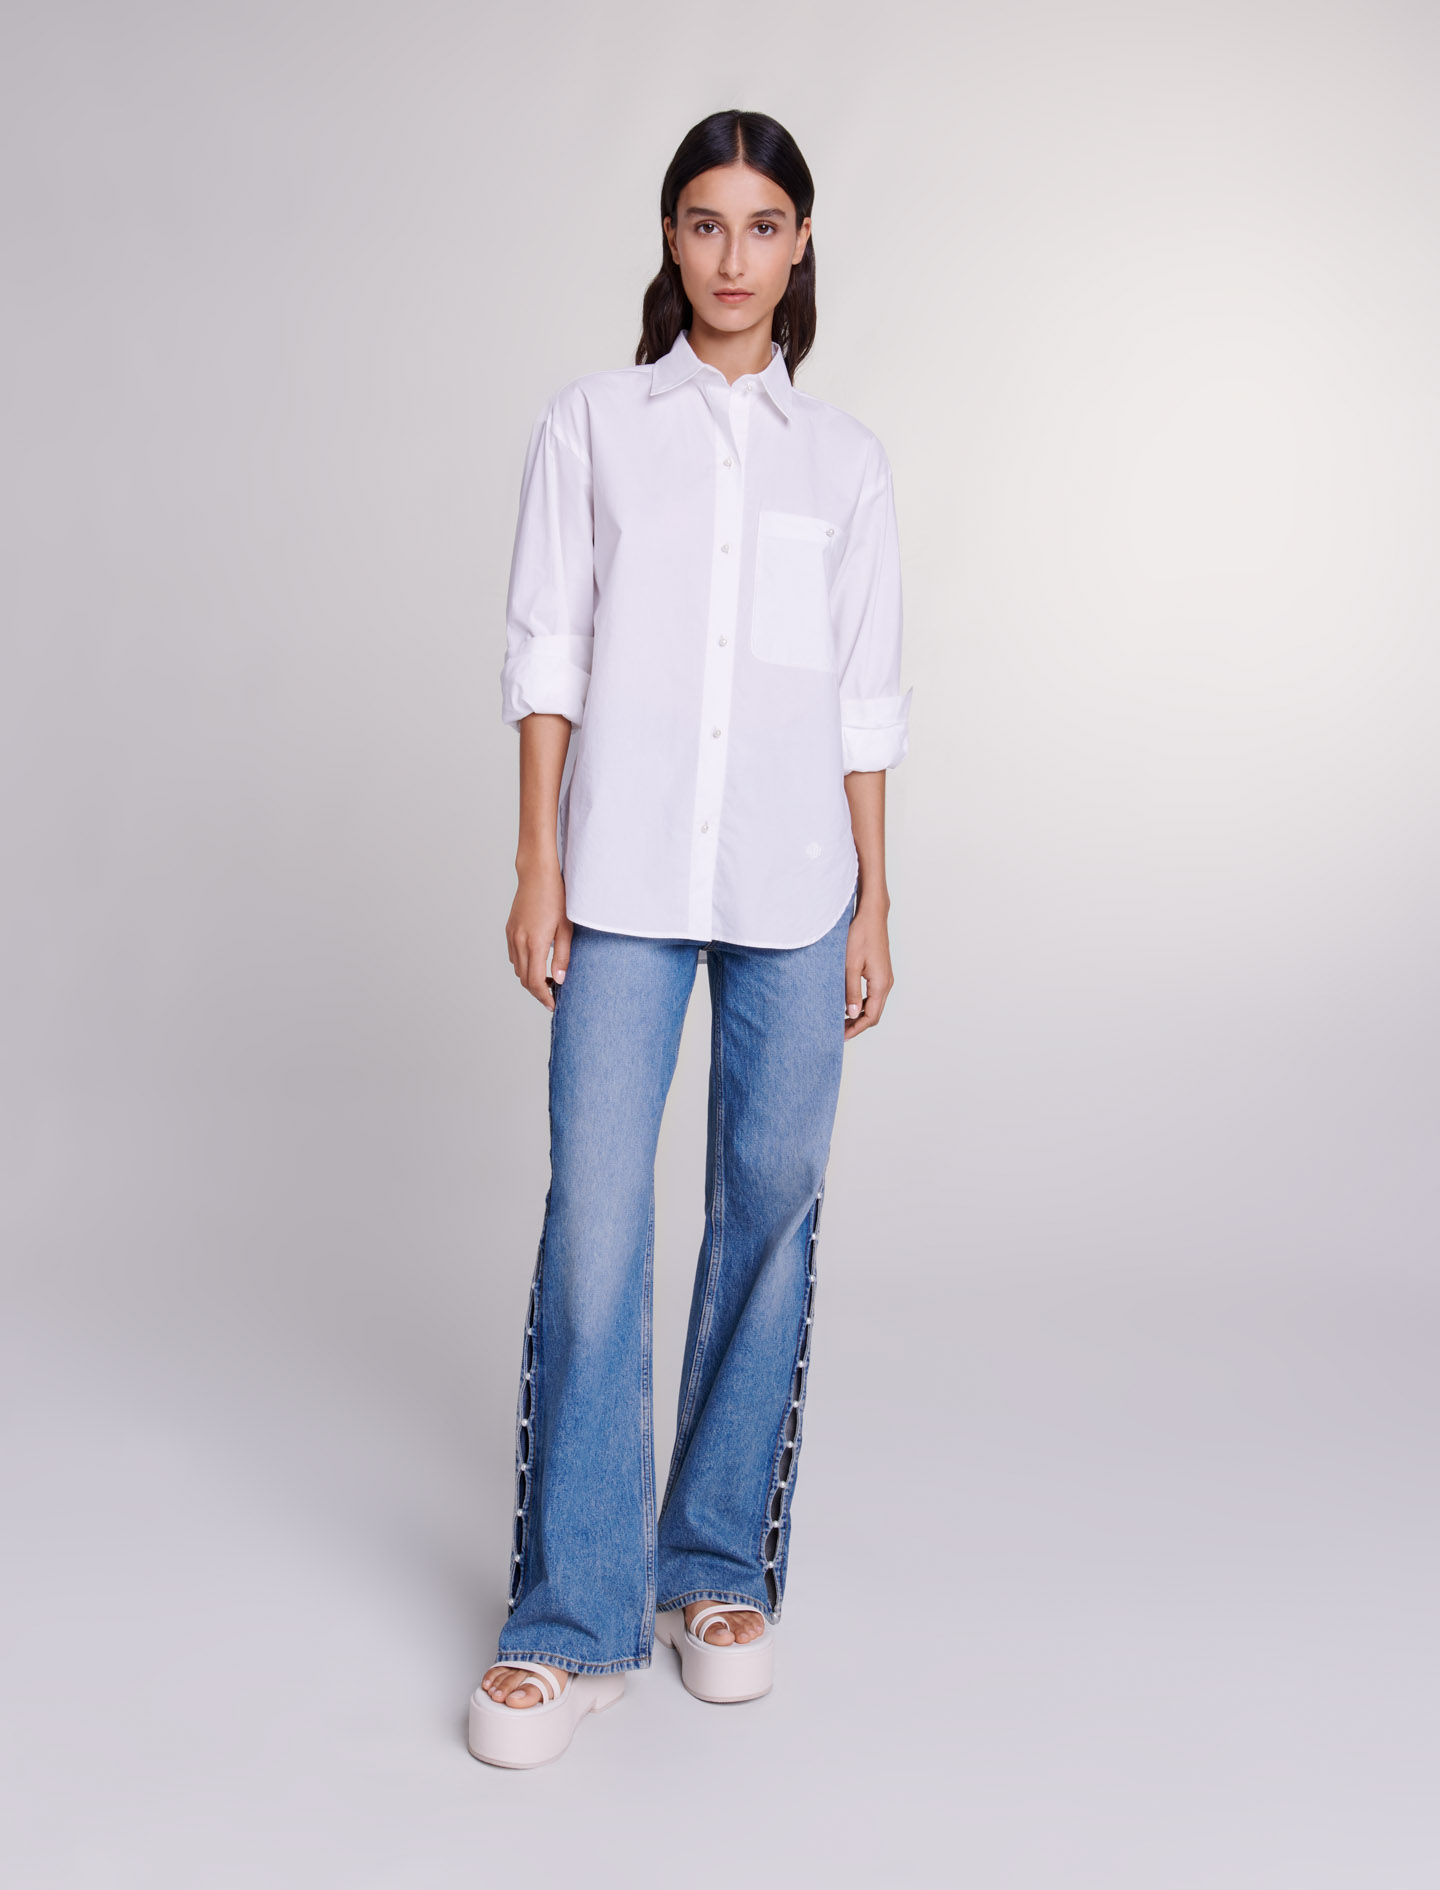 Maje Woman's cotton White cotton poplin shirt for Spring/Summer, in color White / White